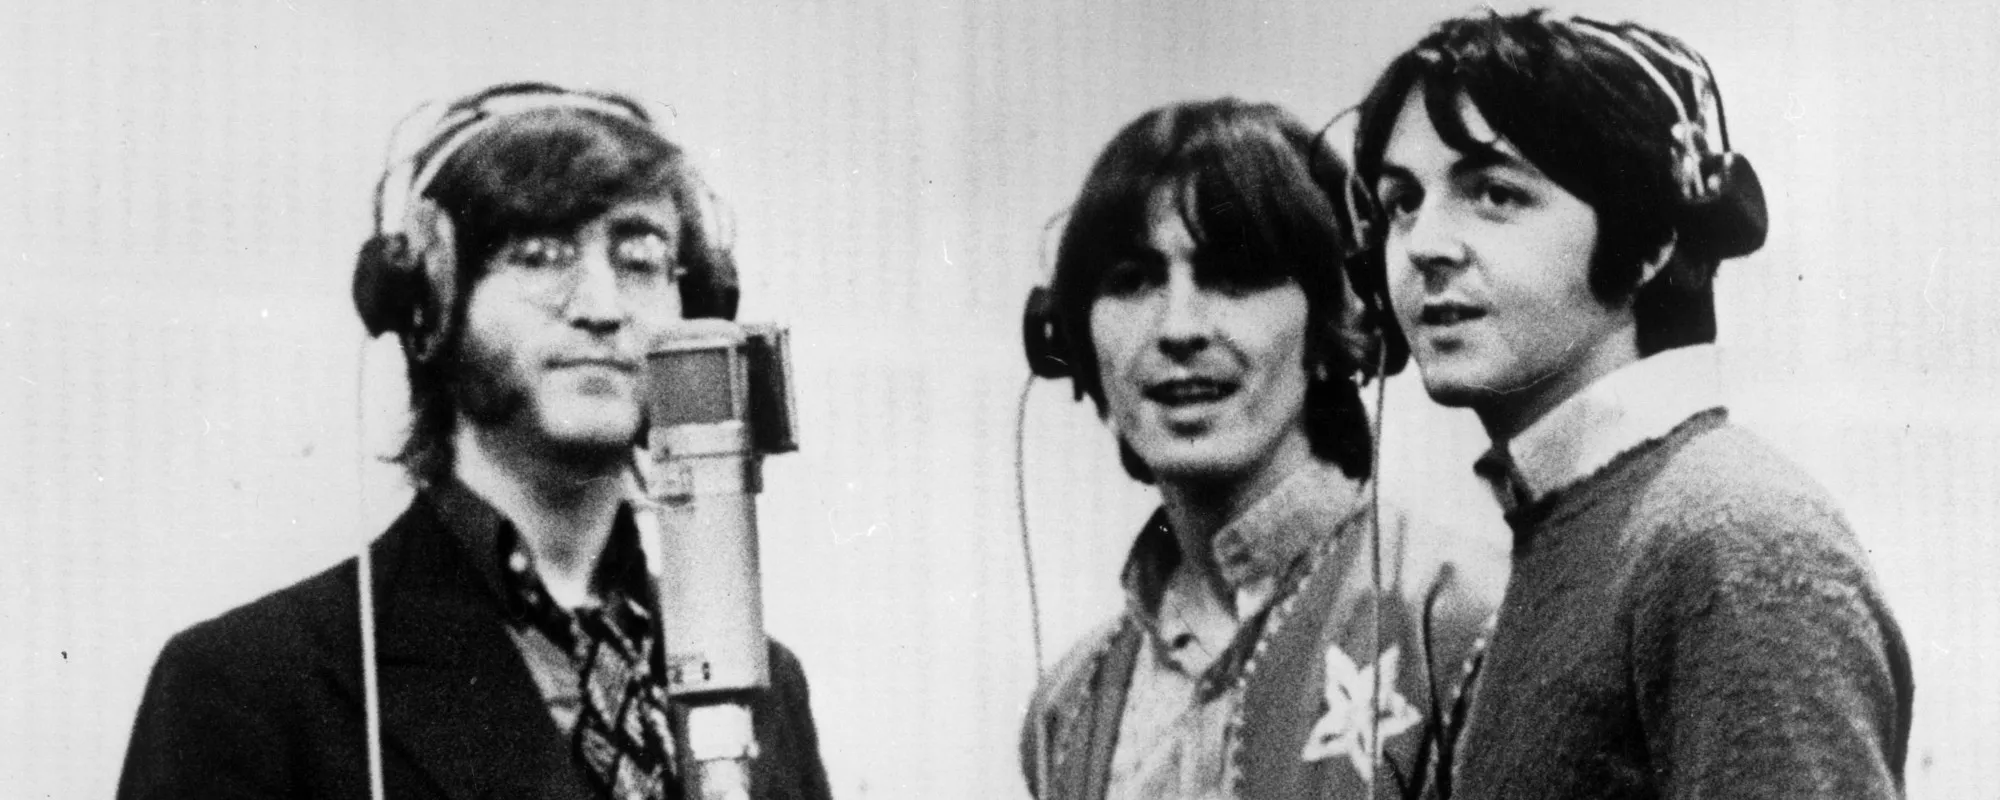 The Meaning Behind the Beatles’ Off-Kilter “A Day In The Life”